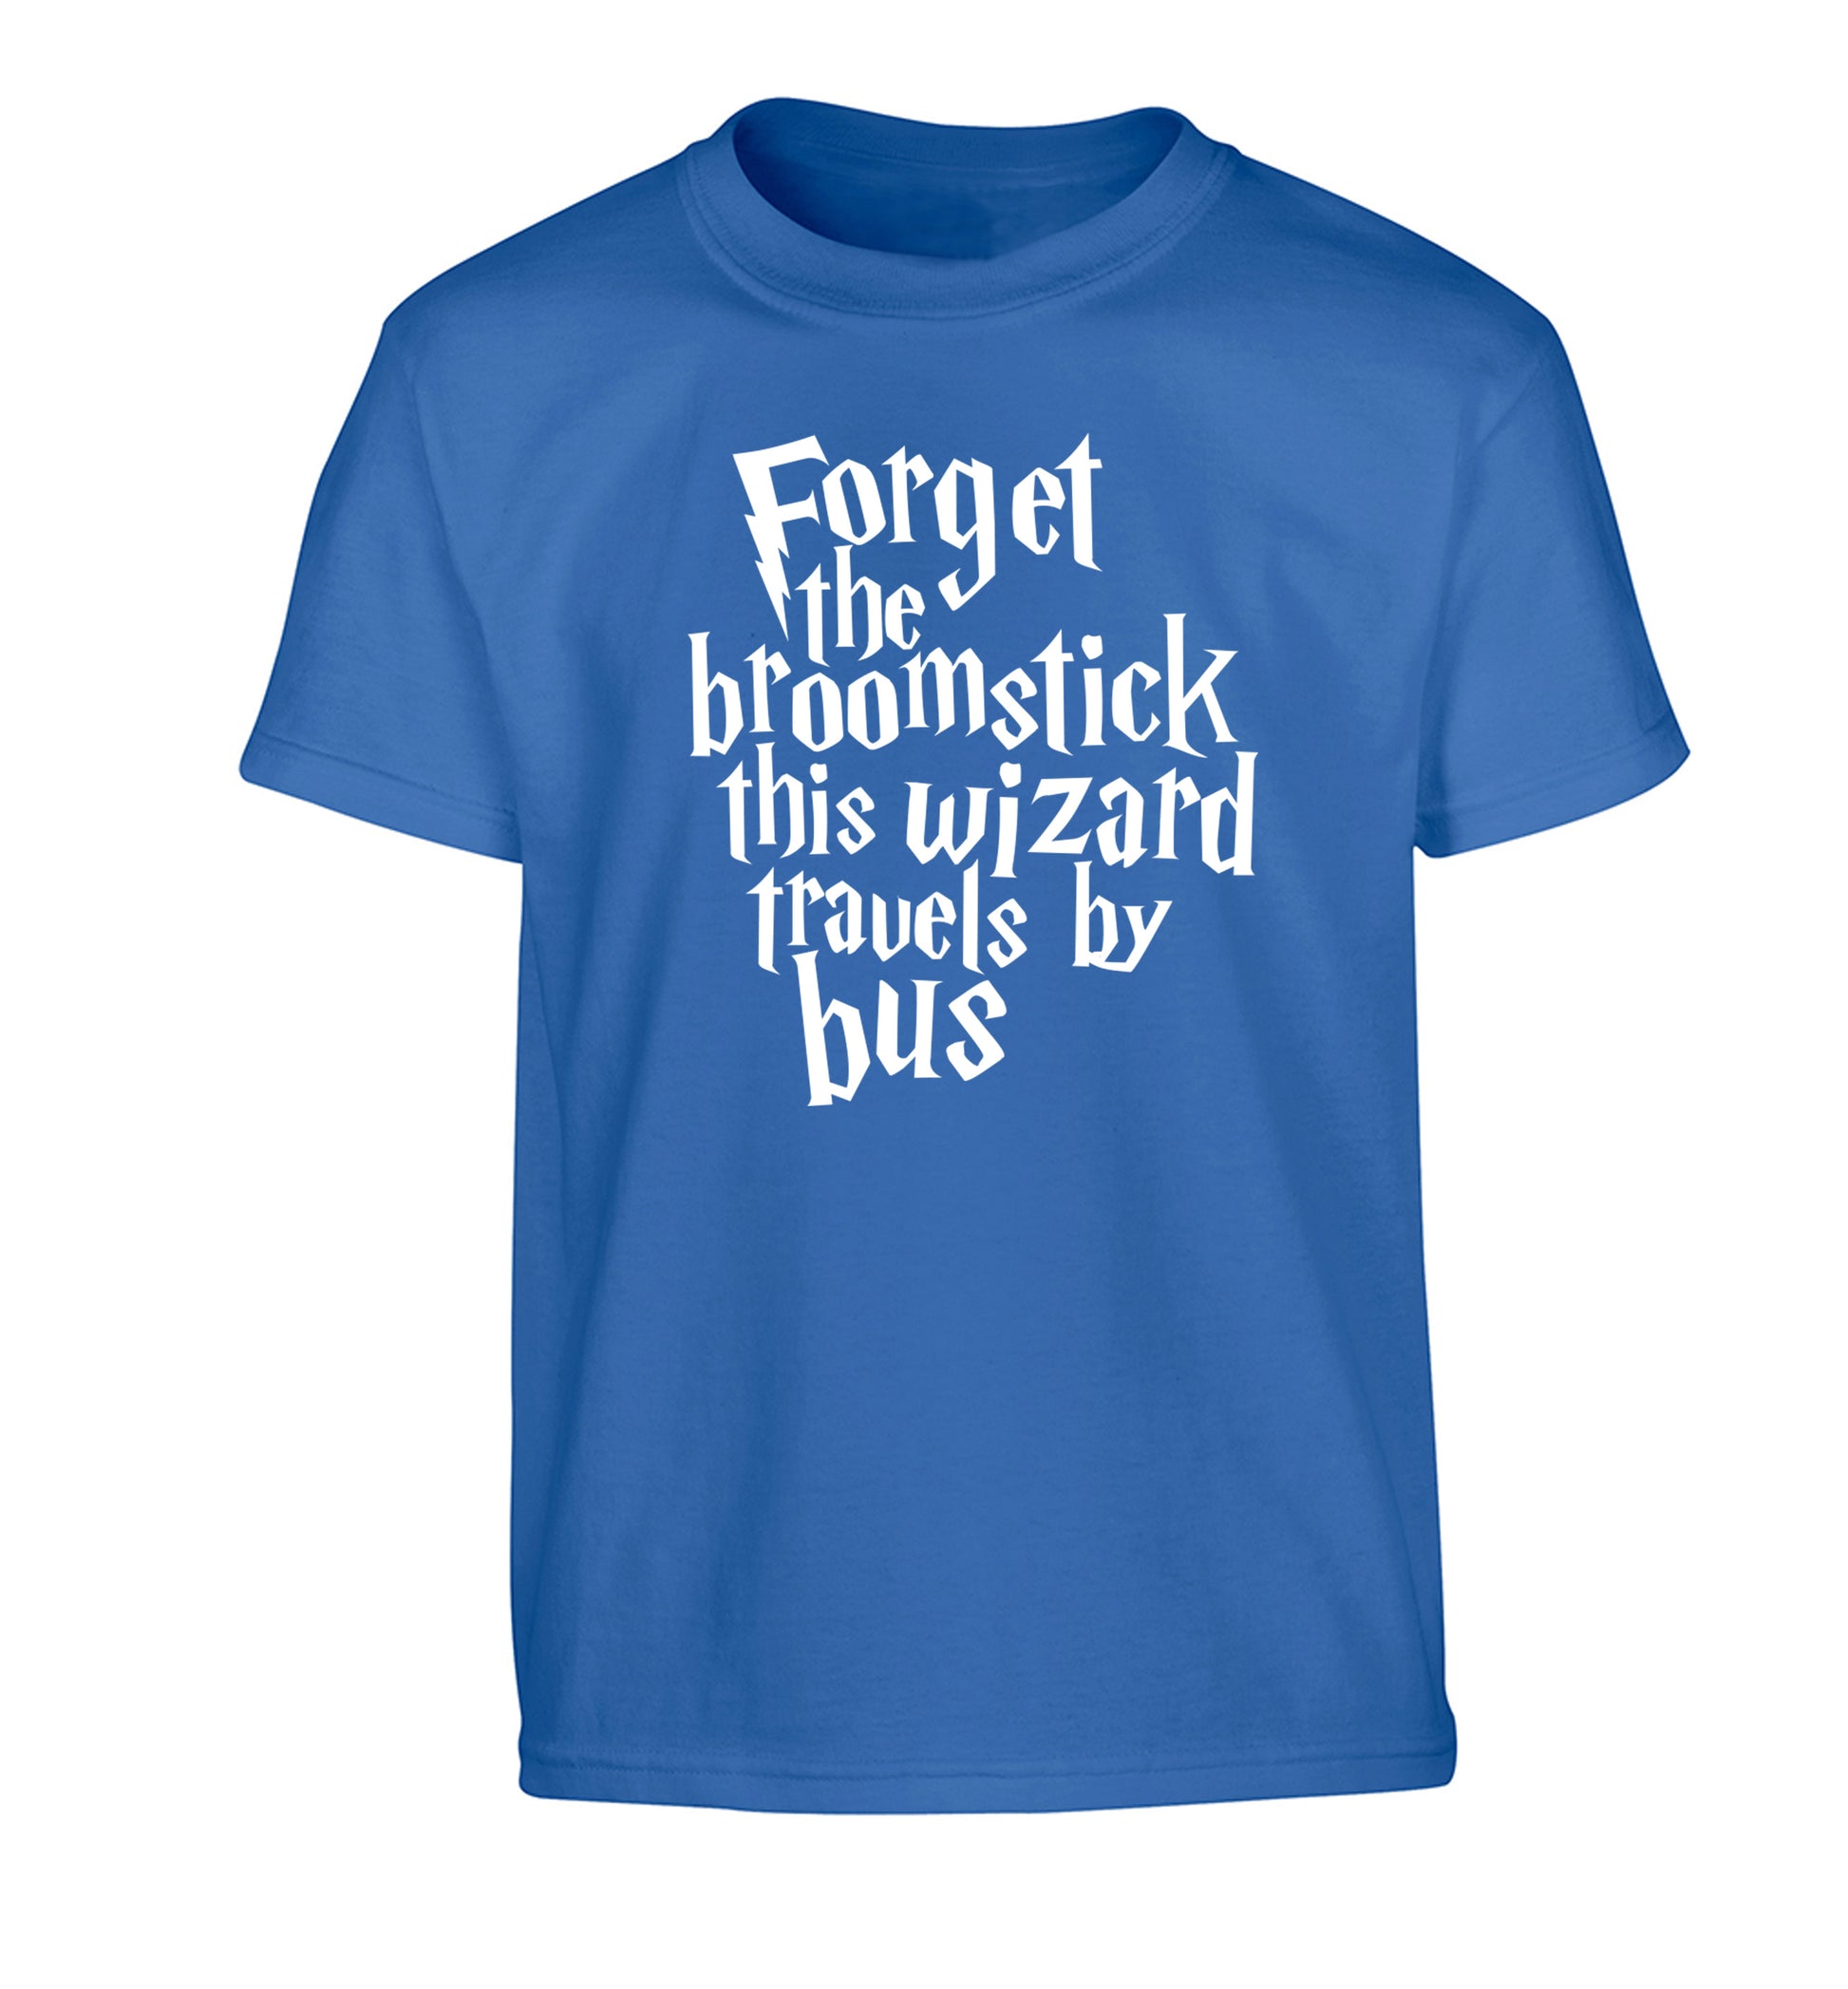 Forget the broomstick this wizard travels by bus Children's blue Tshirt 12-14 Years